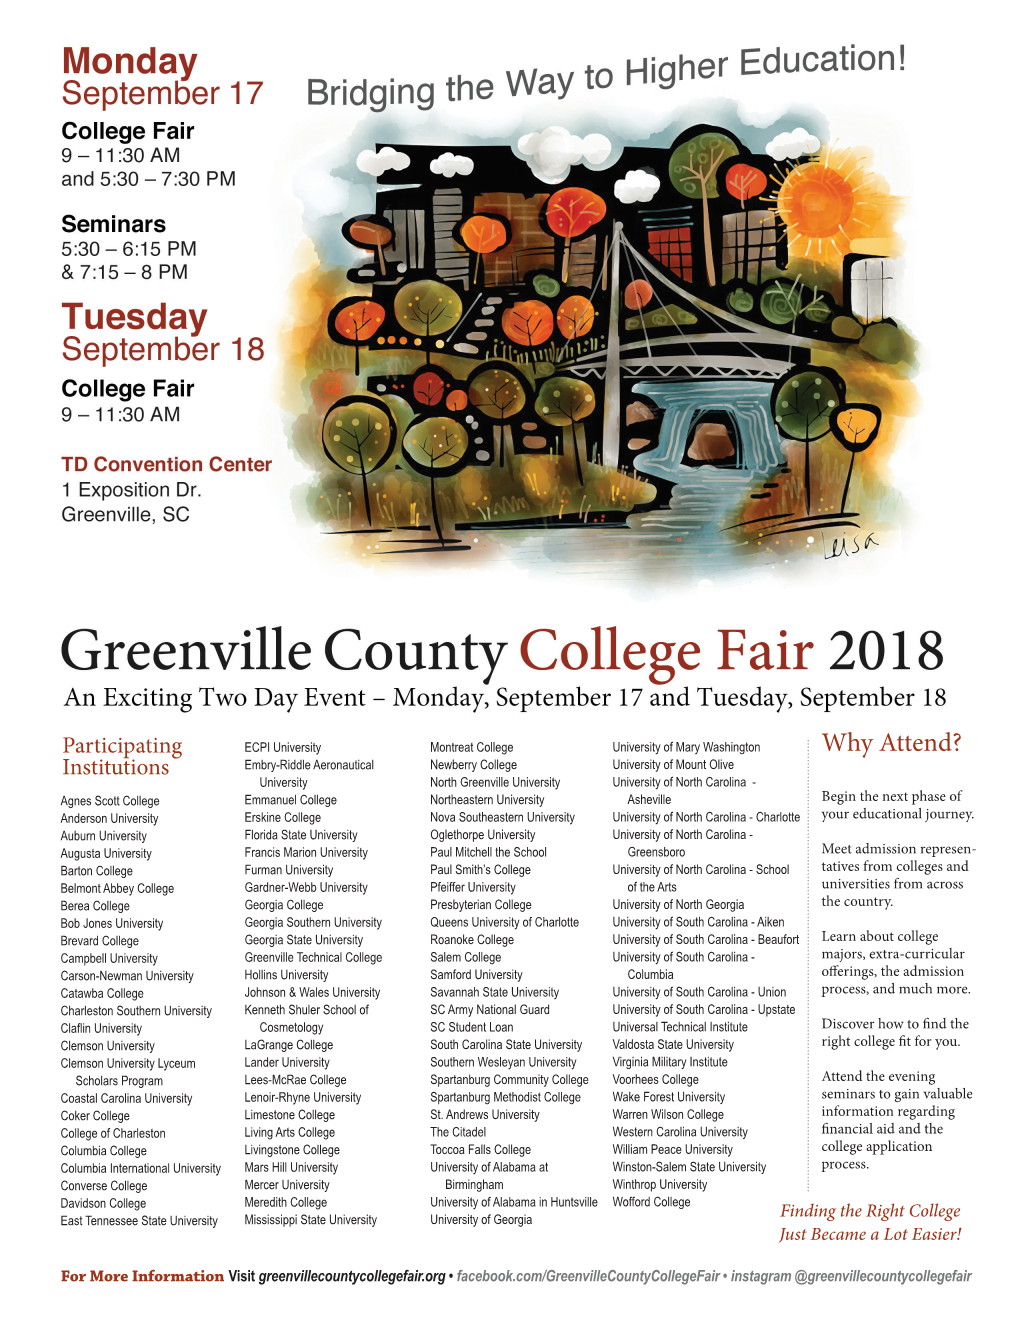 Greenville County College Fair Partners